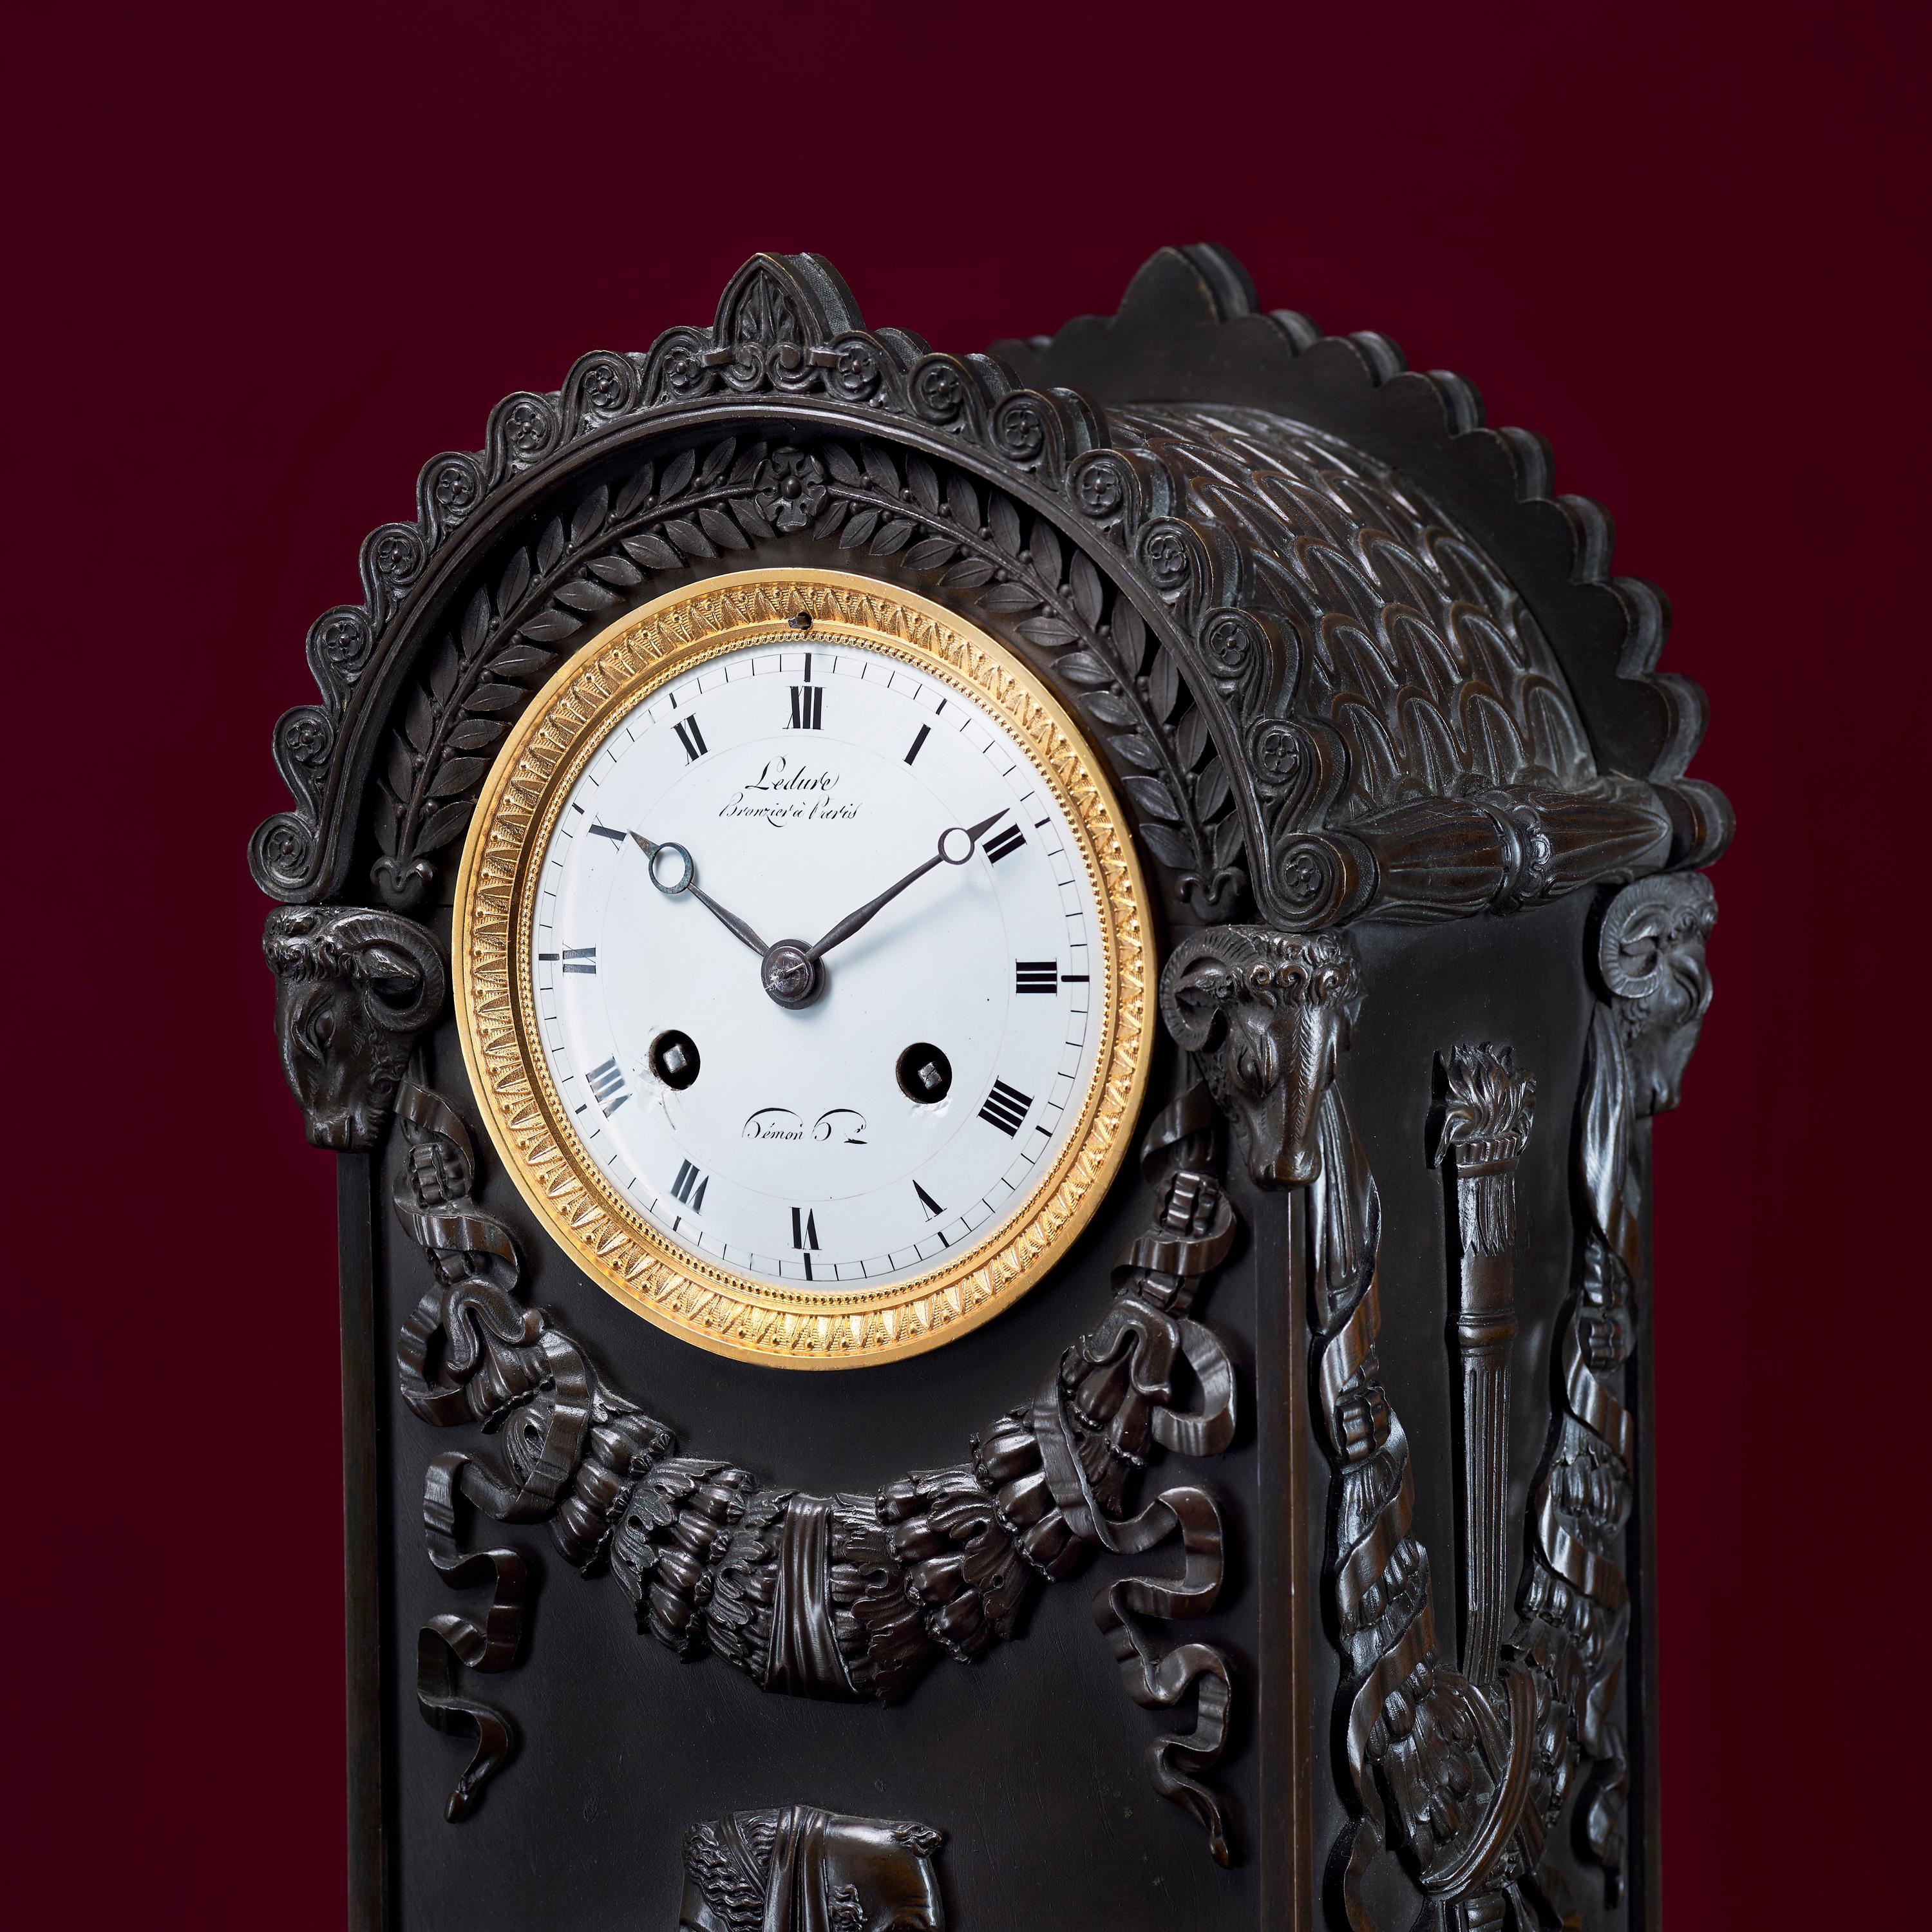 Very fine early 19th century Empire period mantel clock of patinated bronze. It is signed by one of the best Parisian bronzers Pierre Victor Ledure and his collaborating clockmaker Claude Hémon. The case of classical form with typical Empire